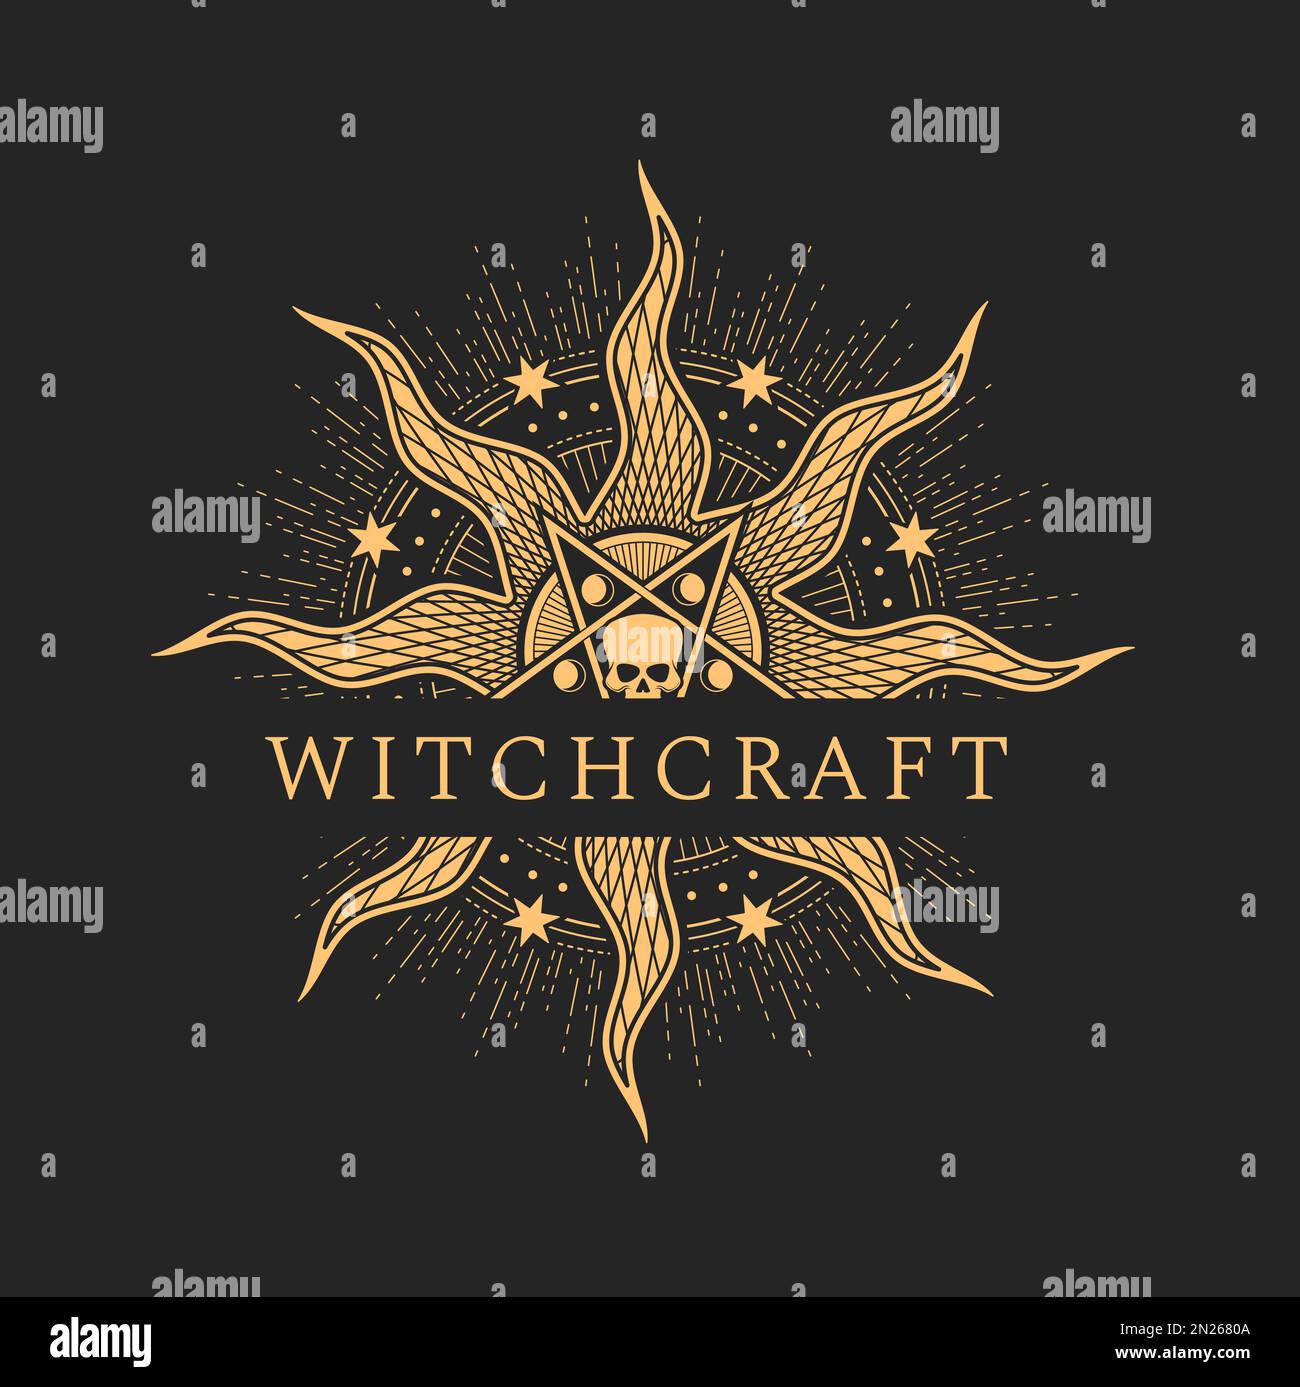 Seamless Pattern With Devil And Alchemy Signs, Magic Seals On